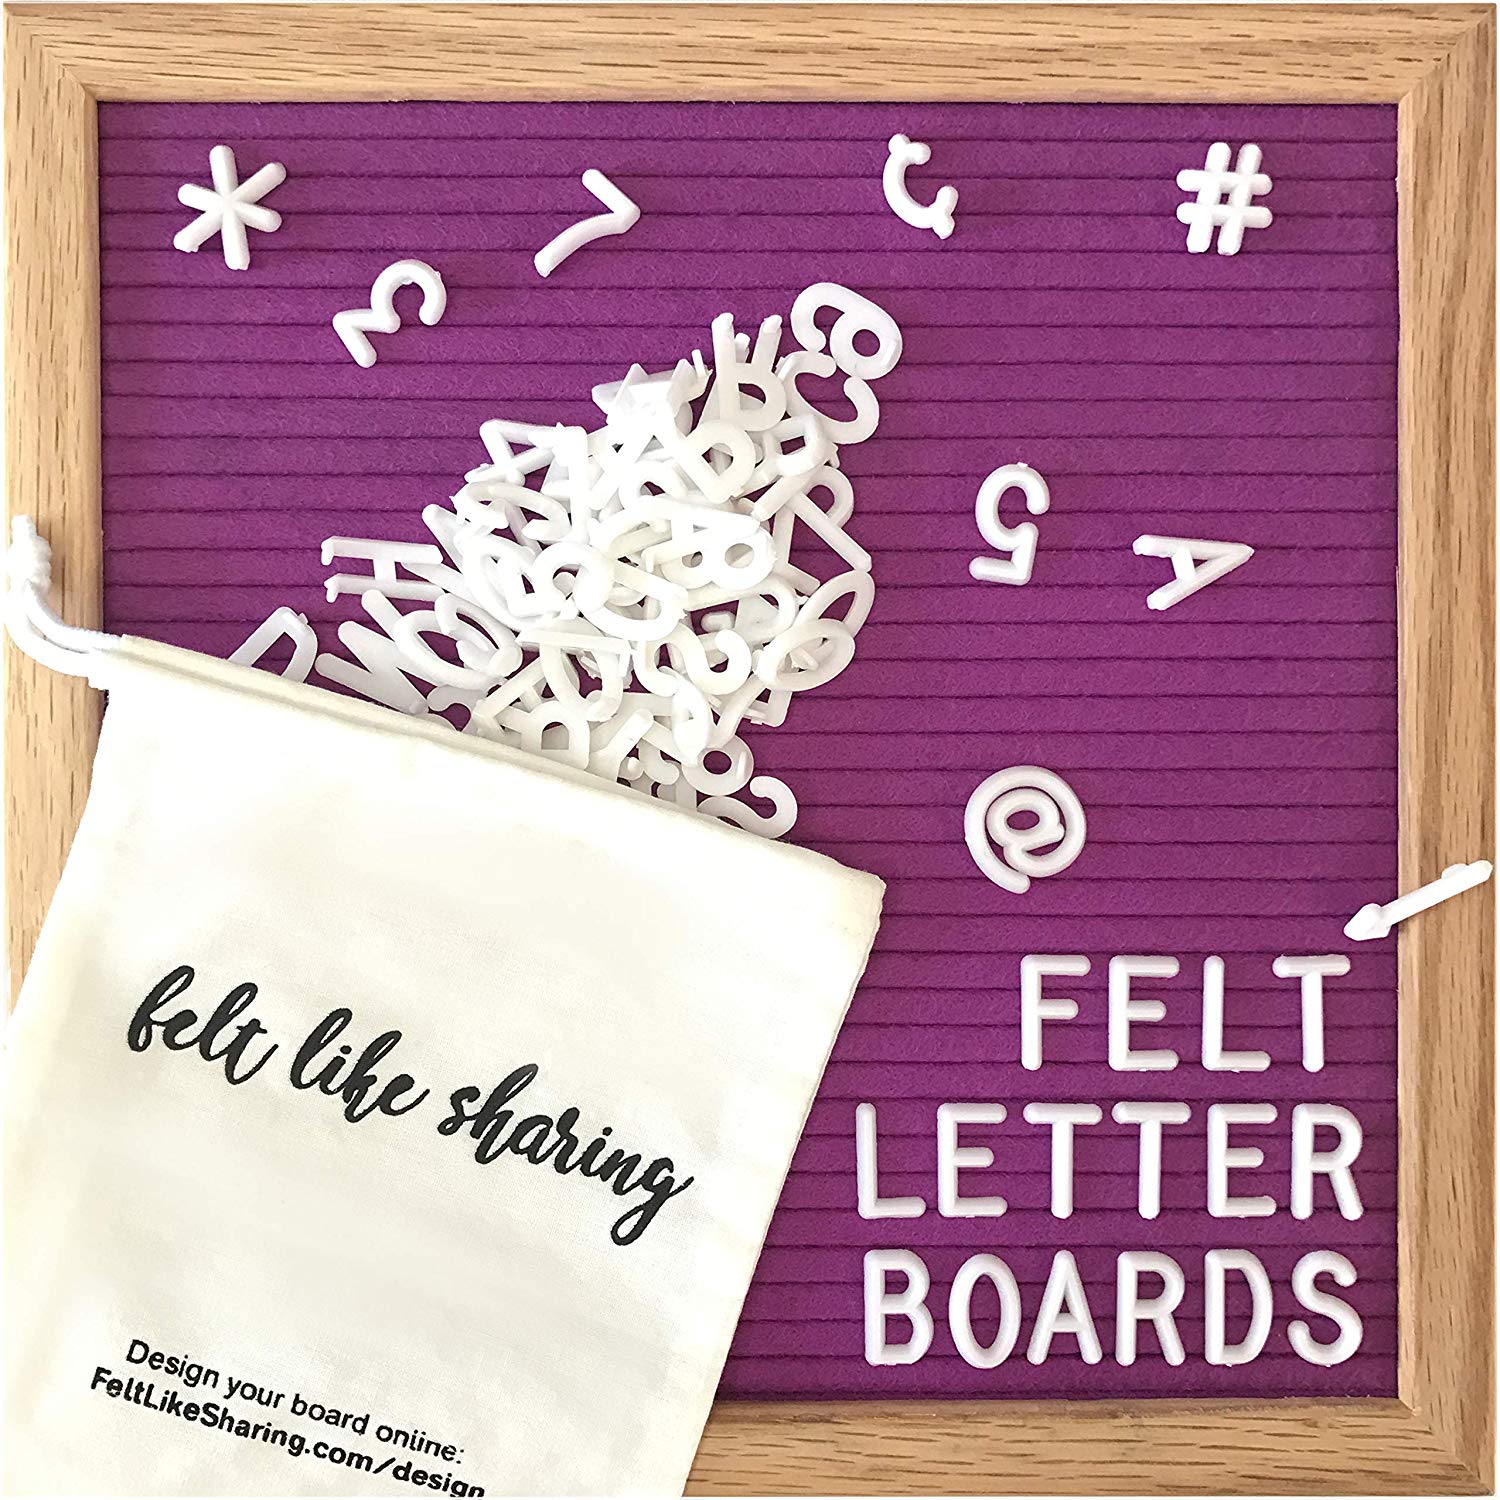 Cool Gifts For Teens 2022: Felt Letter Board 2022